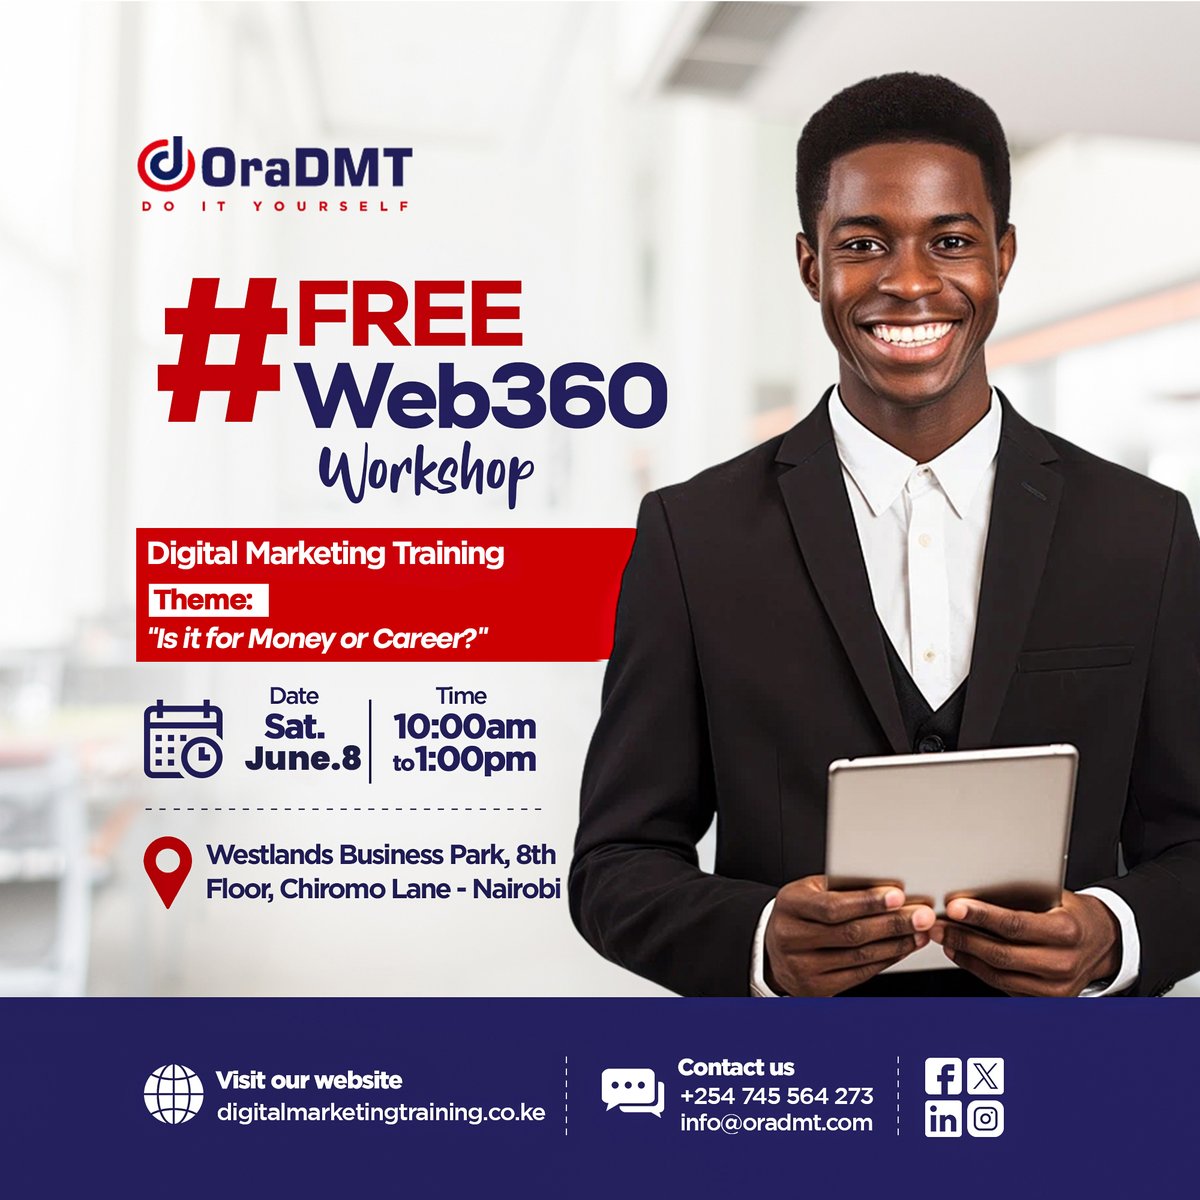 Ready to take your career to the next level? OraDMT's FREE Digital Marketing Training is on June 8th! Learn the hottest strategies and tools to boost your career prospects. Seats are limited, so grab yours today!
Register here: forms.gle/V8KJPnoPBxs4cW…
#digitalmarketingtips